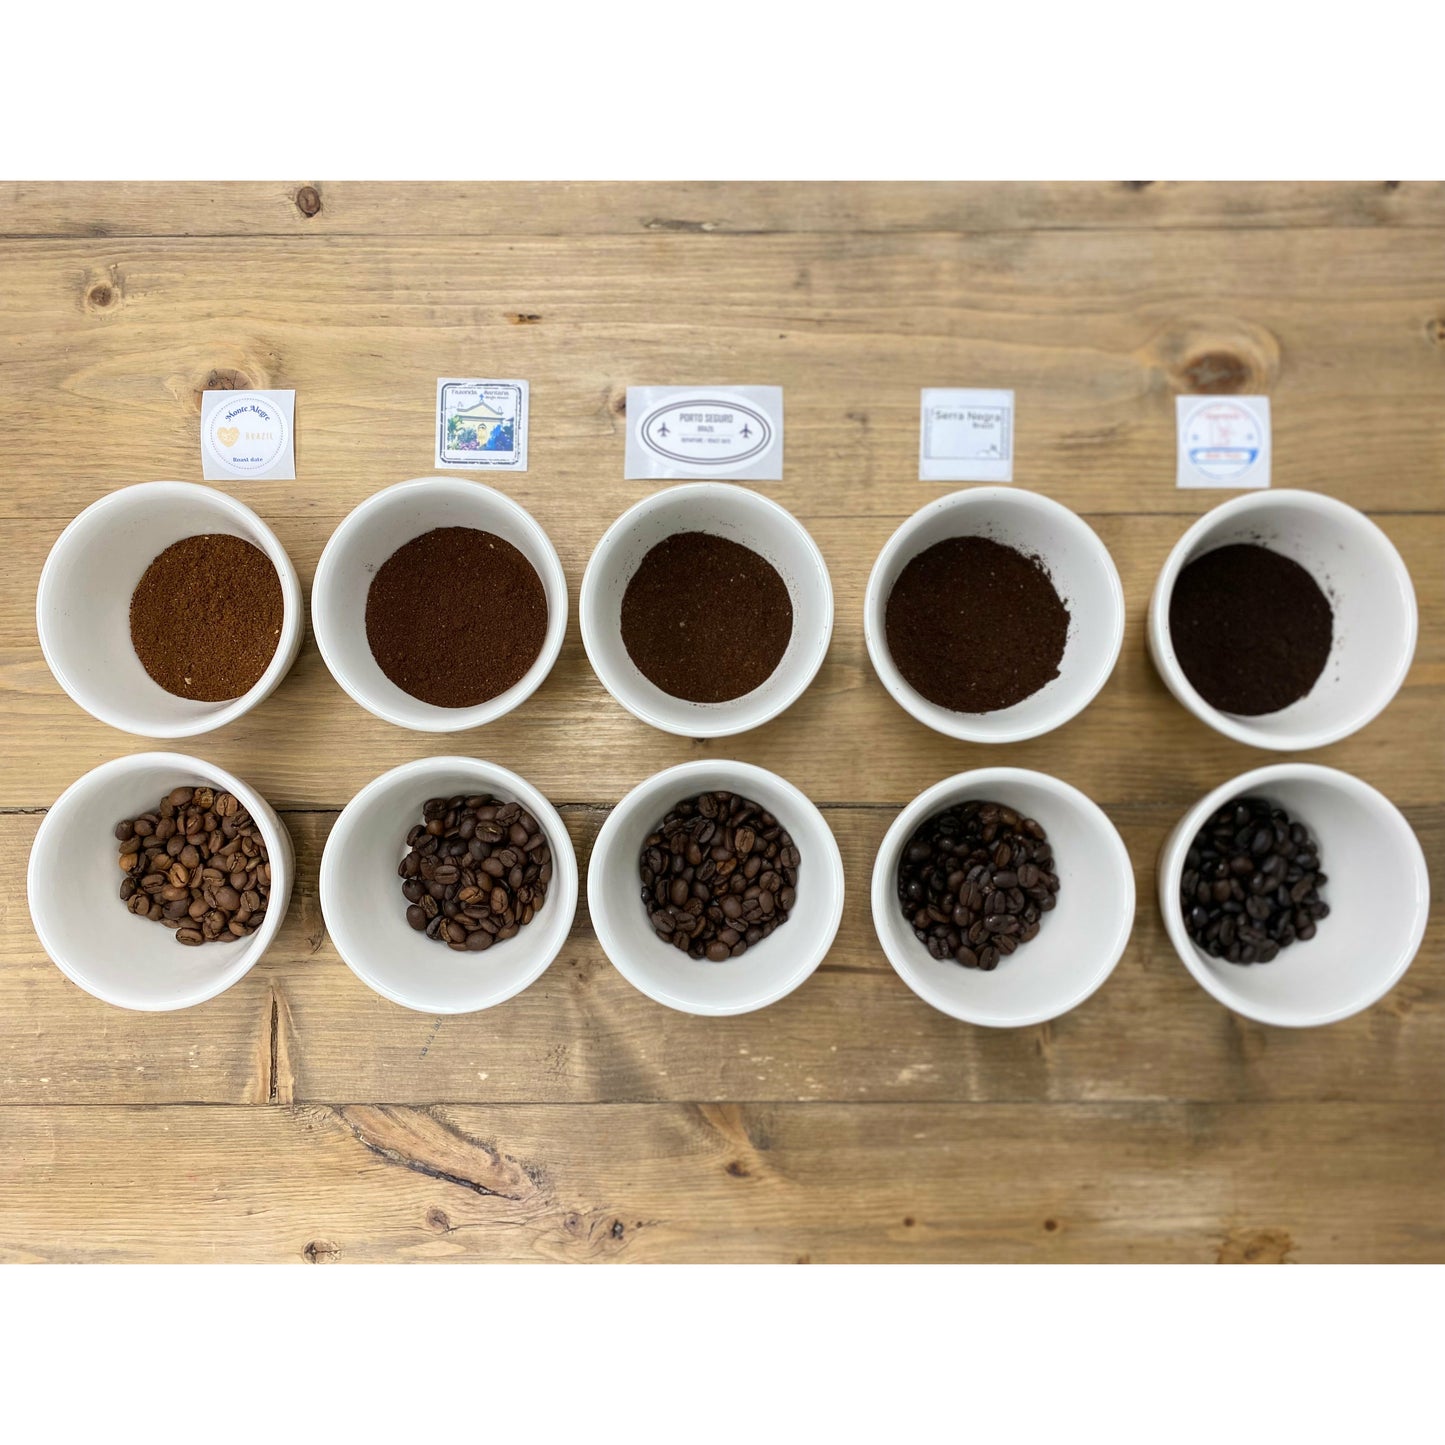 Brazilian coffee subscription (Sample the flavors in month 1)